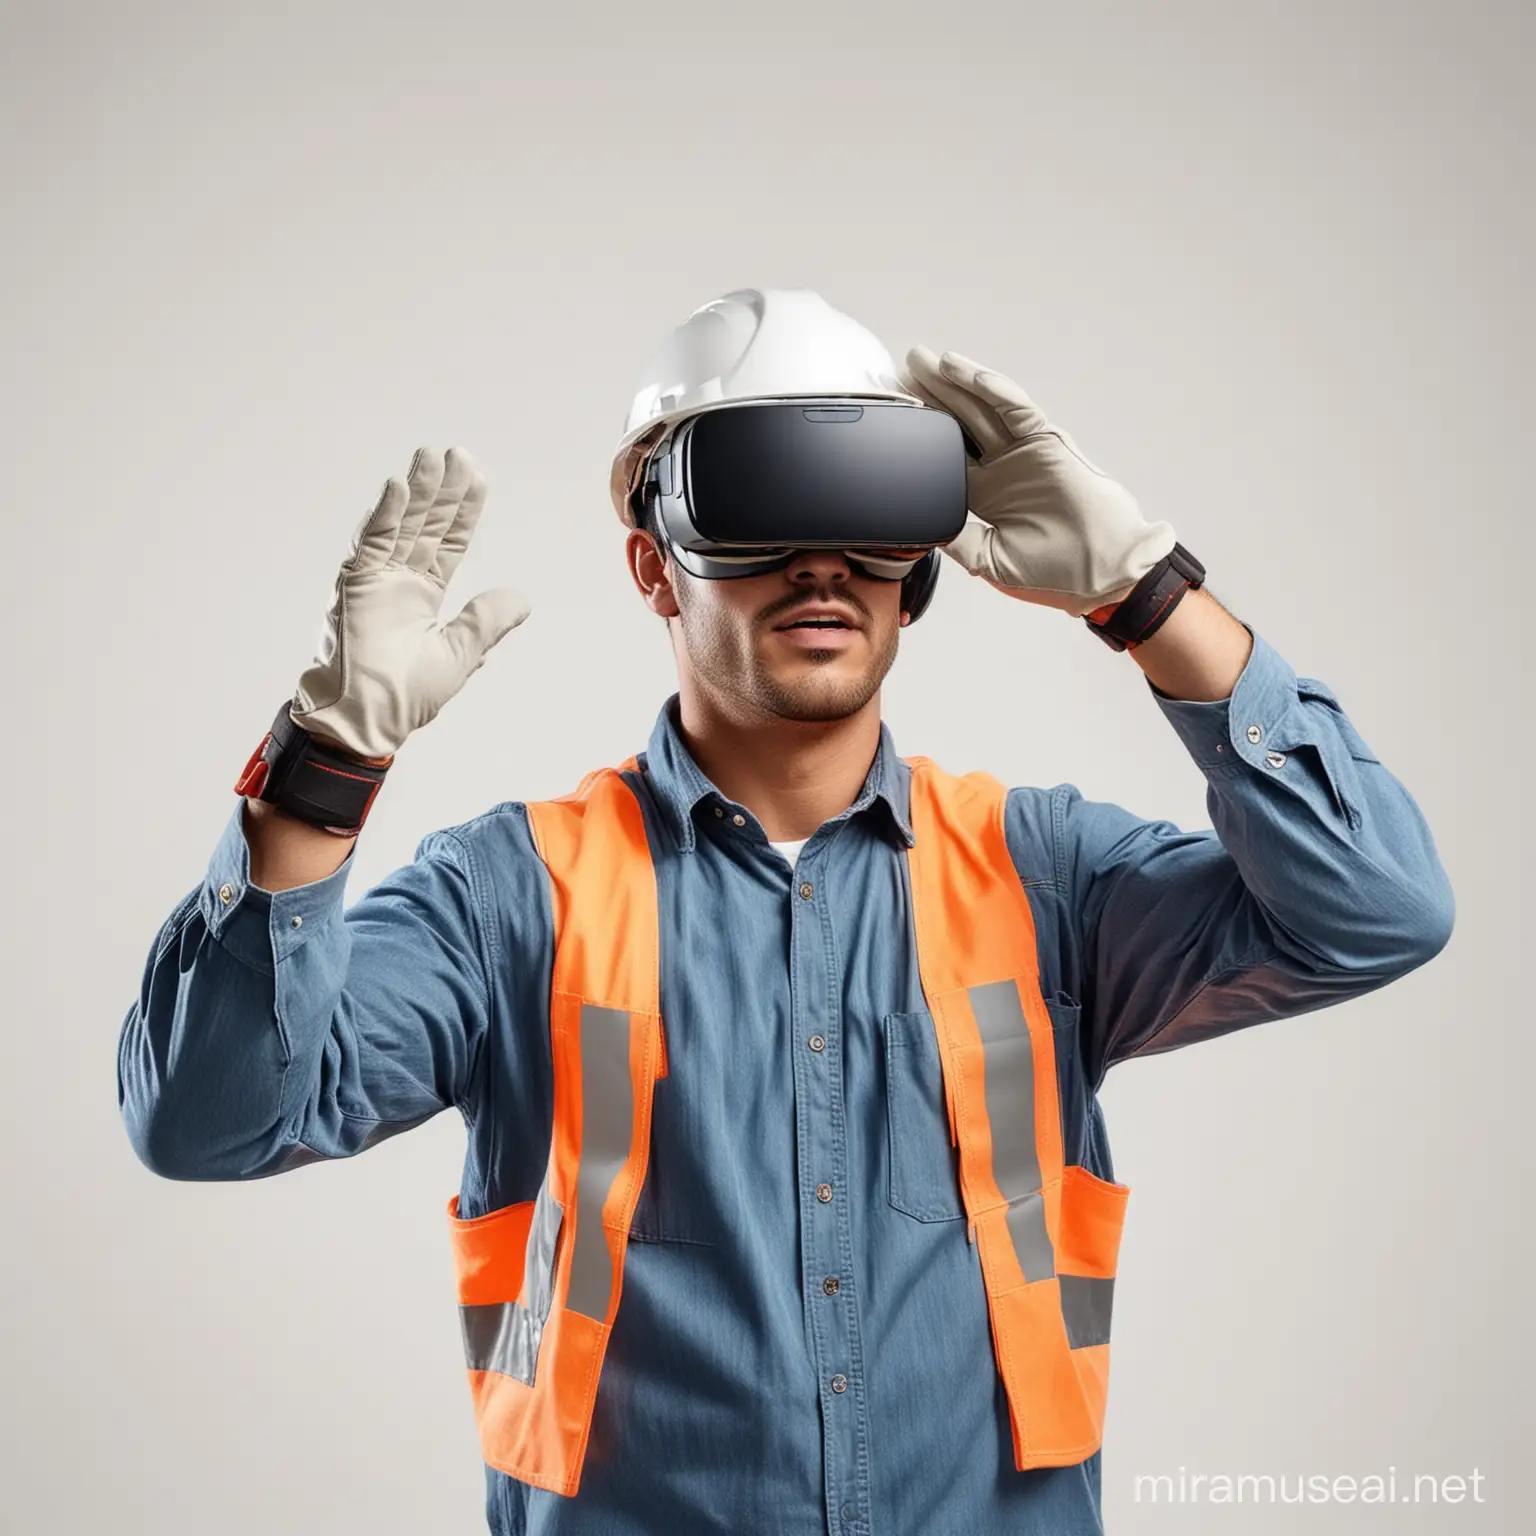 Construction Worker Wearing Virtual Reality Headset and Hard Hat Demonstrating Gesture in White Background